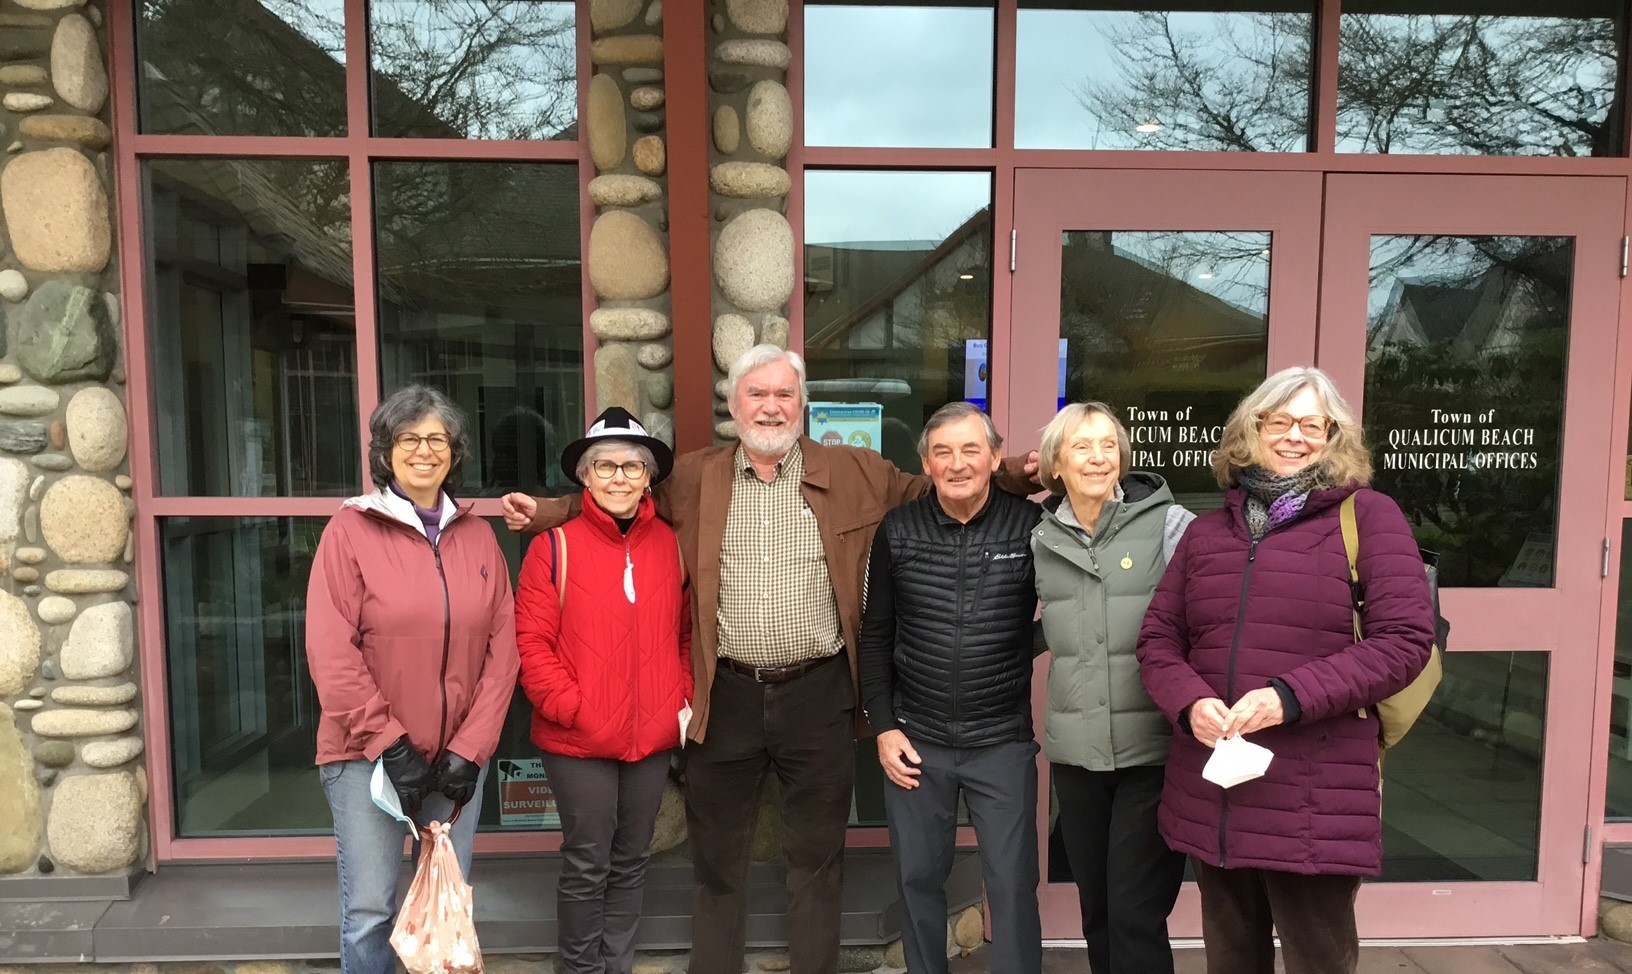 A small group of people standing outside Qualicum Beach municipal offices